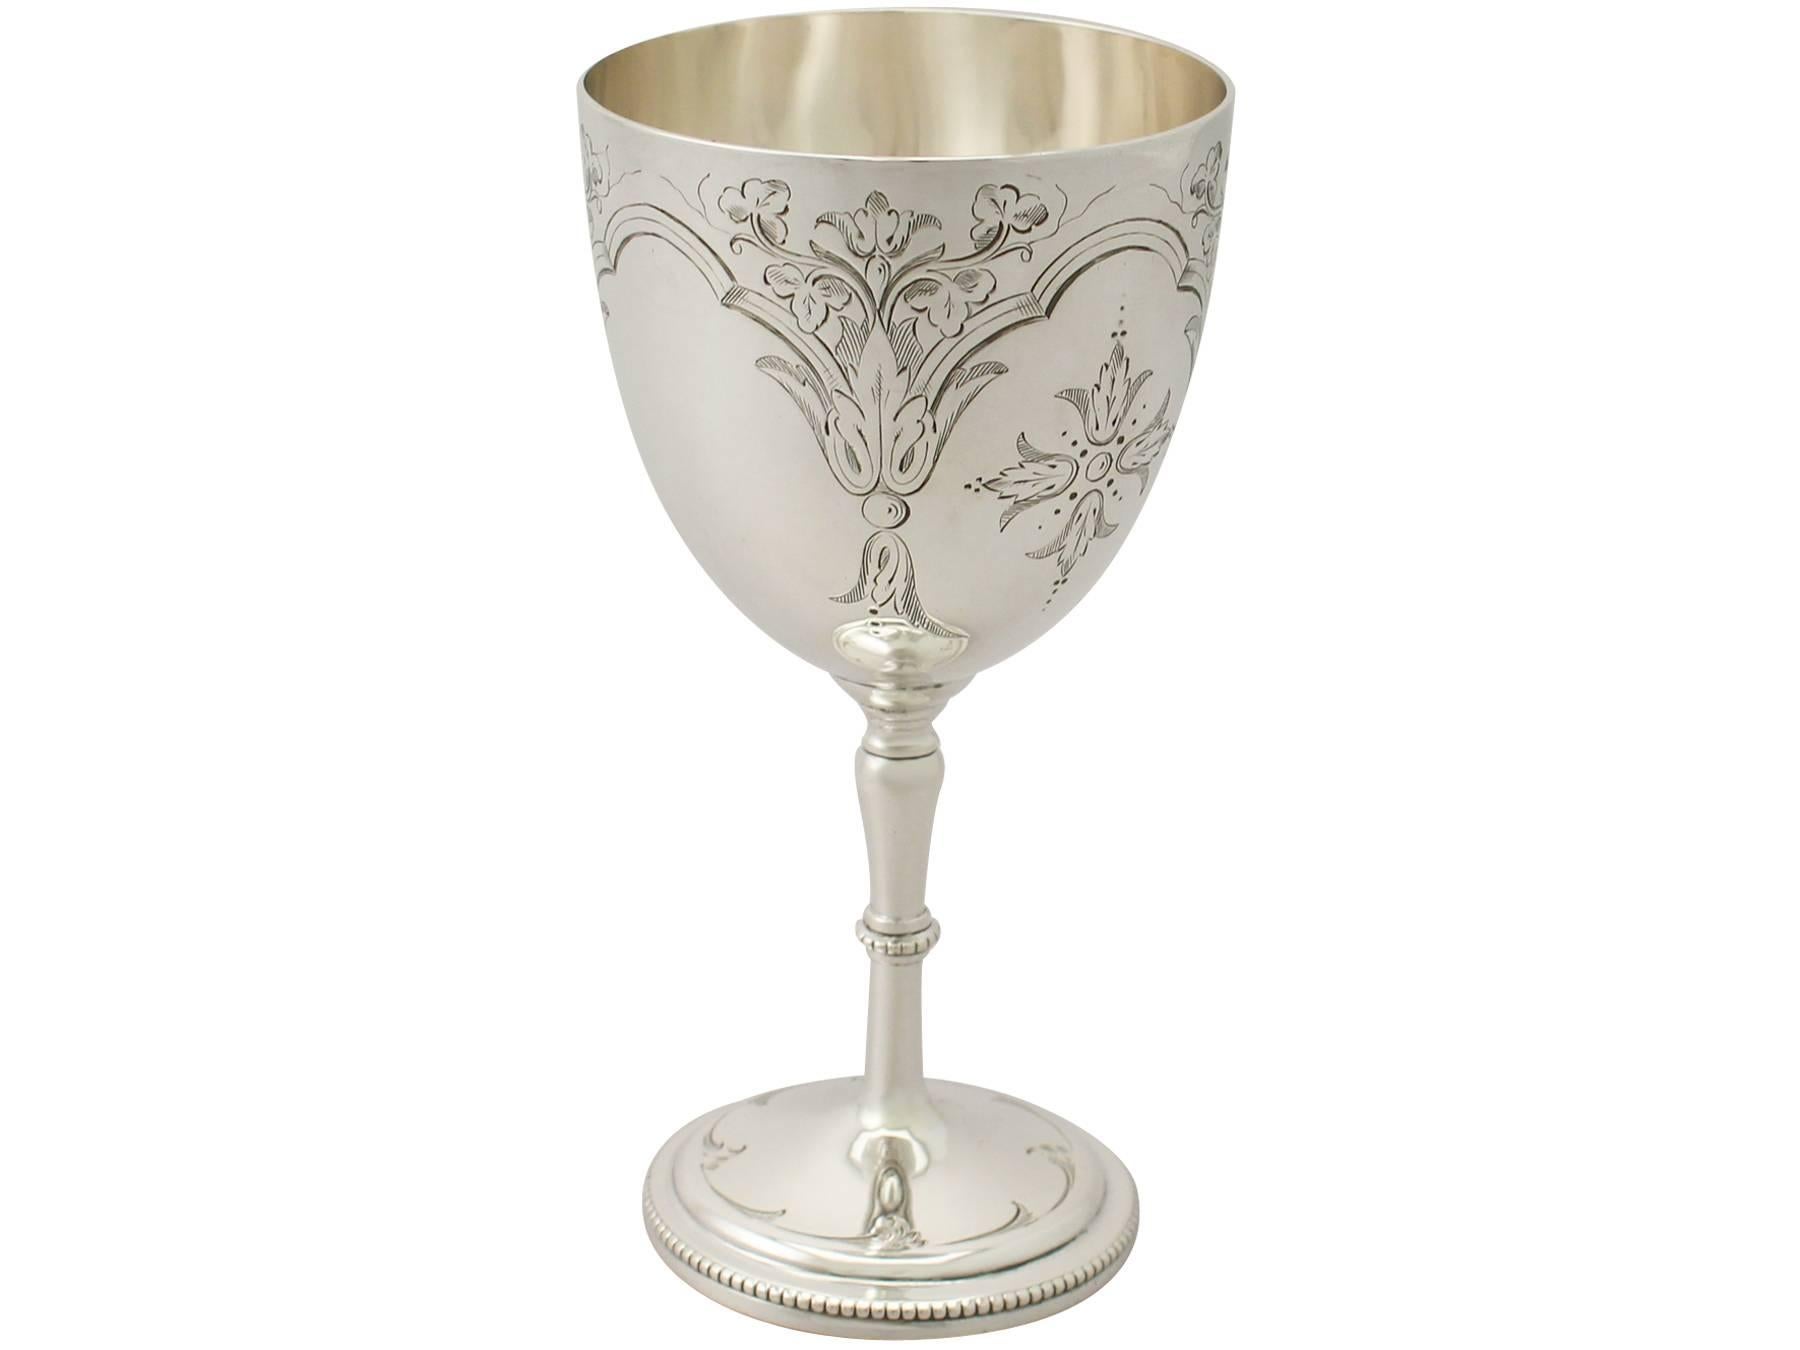 An exceptional, fine and impressive antique Victorian English sterling silver goblet; an addition to our collection of wine and drinks related silverware.

This fine antique Victorian sterling silver goblet has a circular bell shaped form onto a